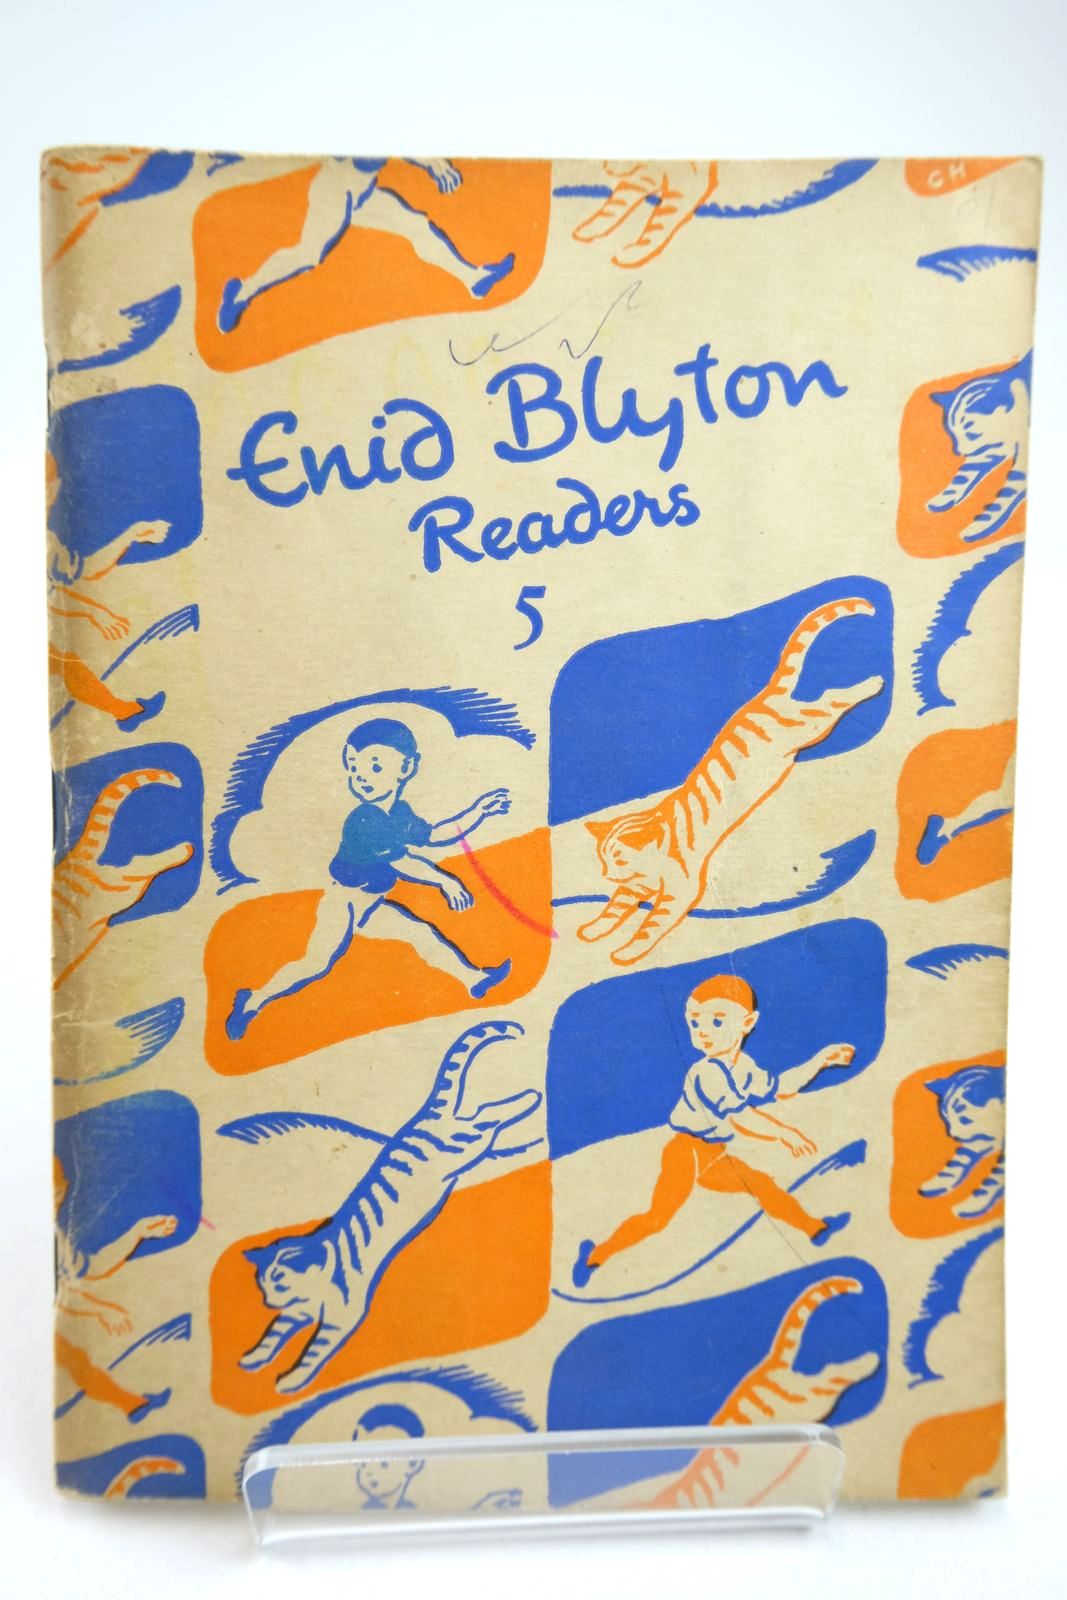 Photo of ENID BLYTON READERS 5 written by Blyton, Enid illustrated by Soper, Eileen published by Macmillan & Co. Ltd. (STOCK CODE: 2133409)  for sale by Stella & Rose's Books